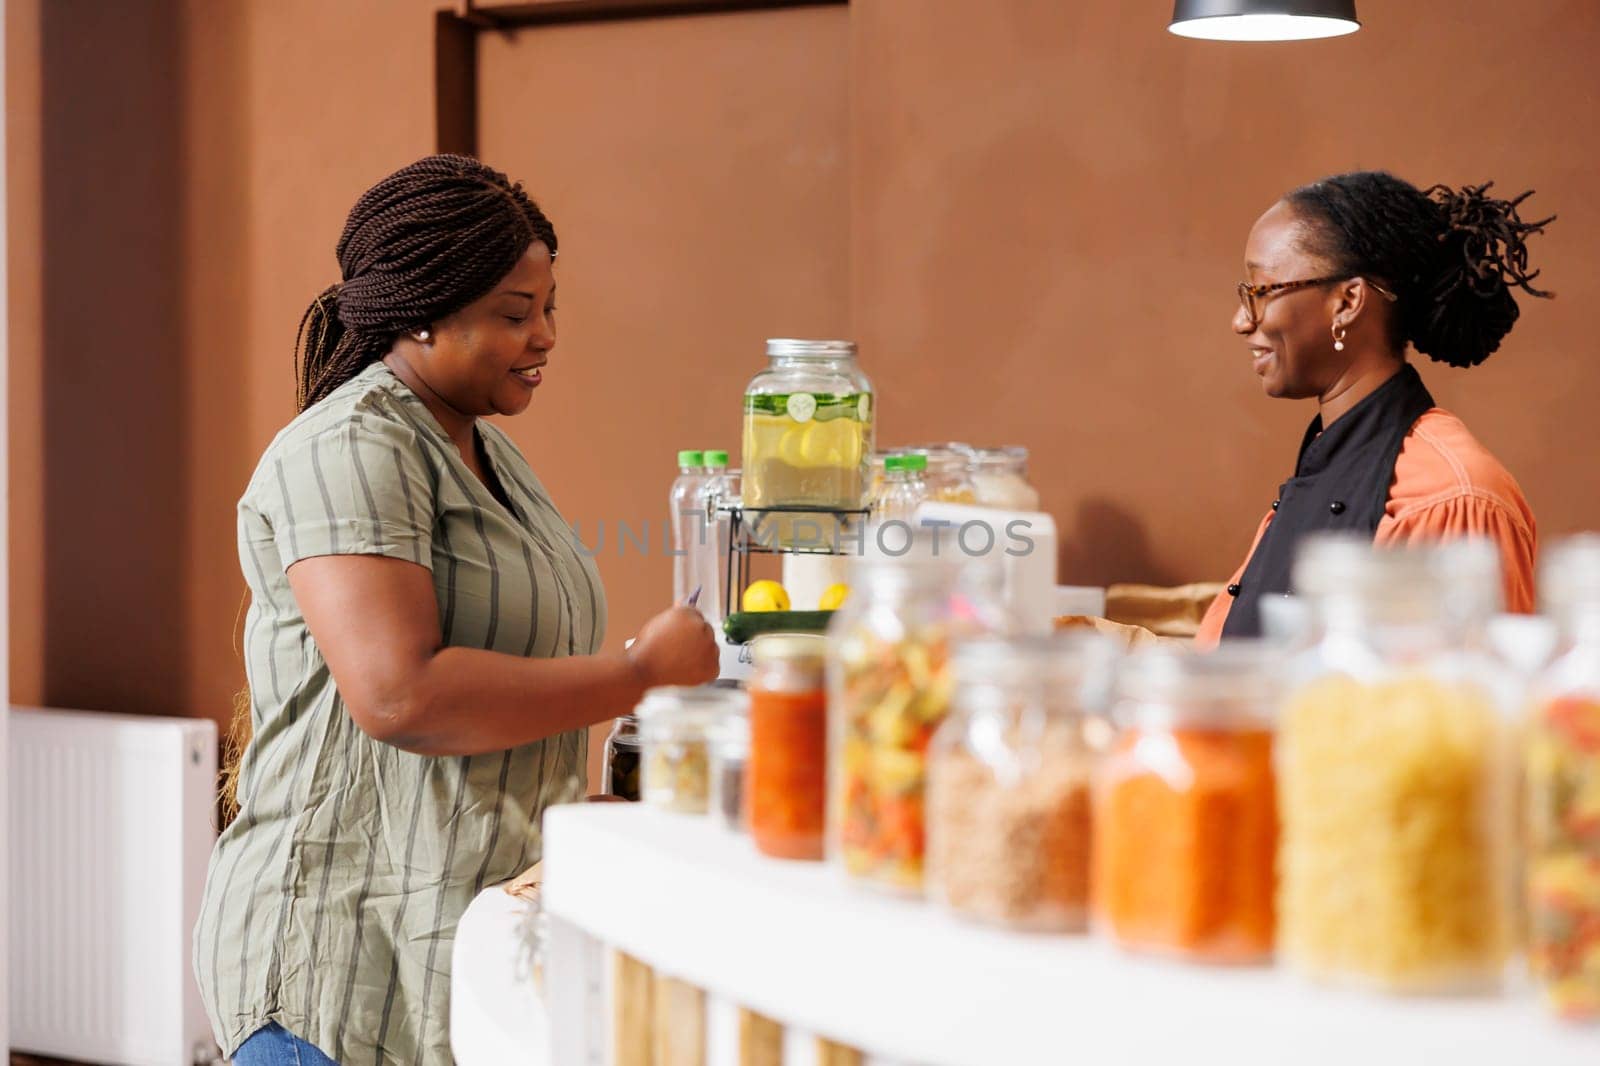 Smiling black woman shops at bio food market, buying fresh organic produce and supporting sustainable practices and zero waste. Female customer preparing to pay for her sustainable products.